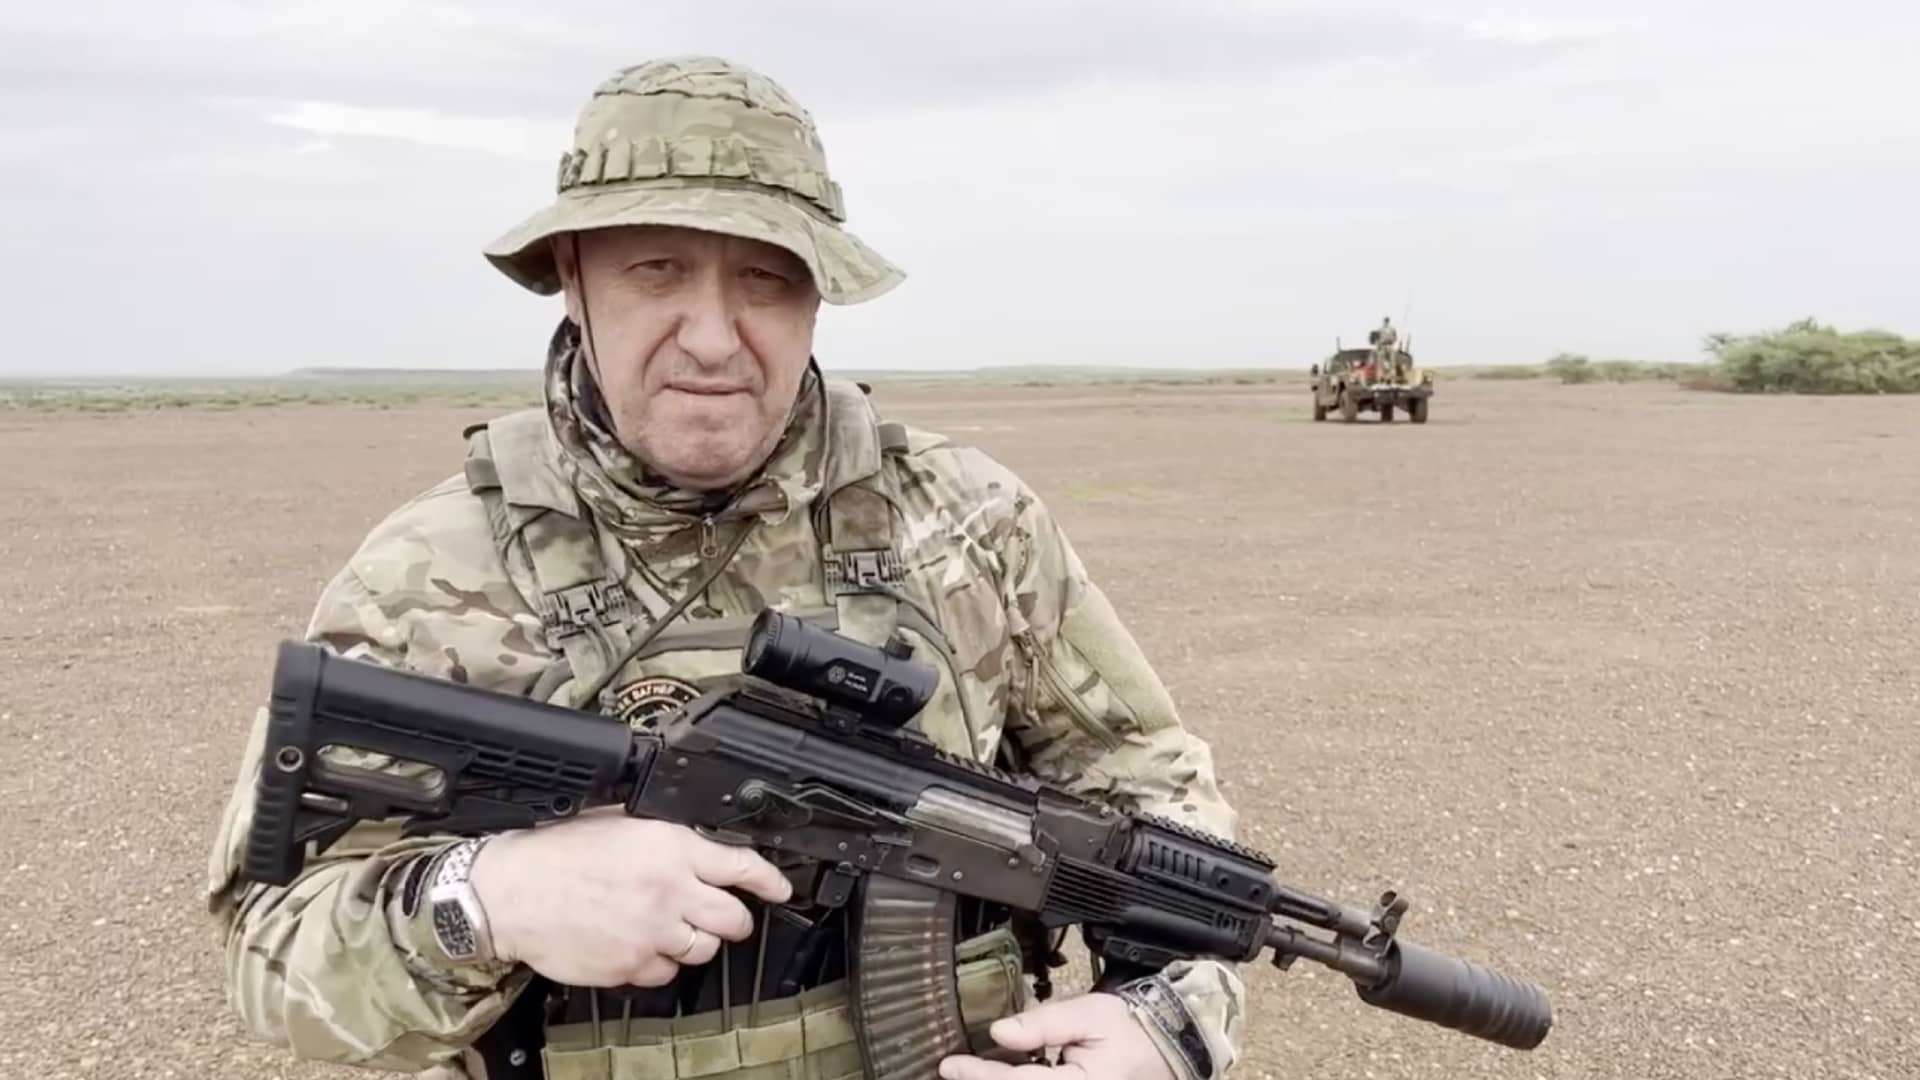 A screen grab captured from a video shared online shows Yevgeny Prigozhin, the founder of the Russian private security company Wagner, holding a rifle in a desert area while wearing camouflage in a video for the first time after his rebellion against the Russian administration in an unspecified location in Africa on August 21, 2023. In the footage shared on the Telegram channel 'Wagner's evacuation', Prigozhin stated that they have made Russia 'even greater' on all continents, including Africa. 